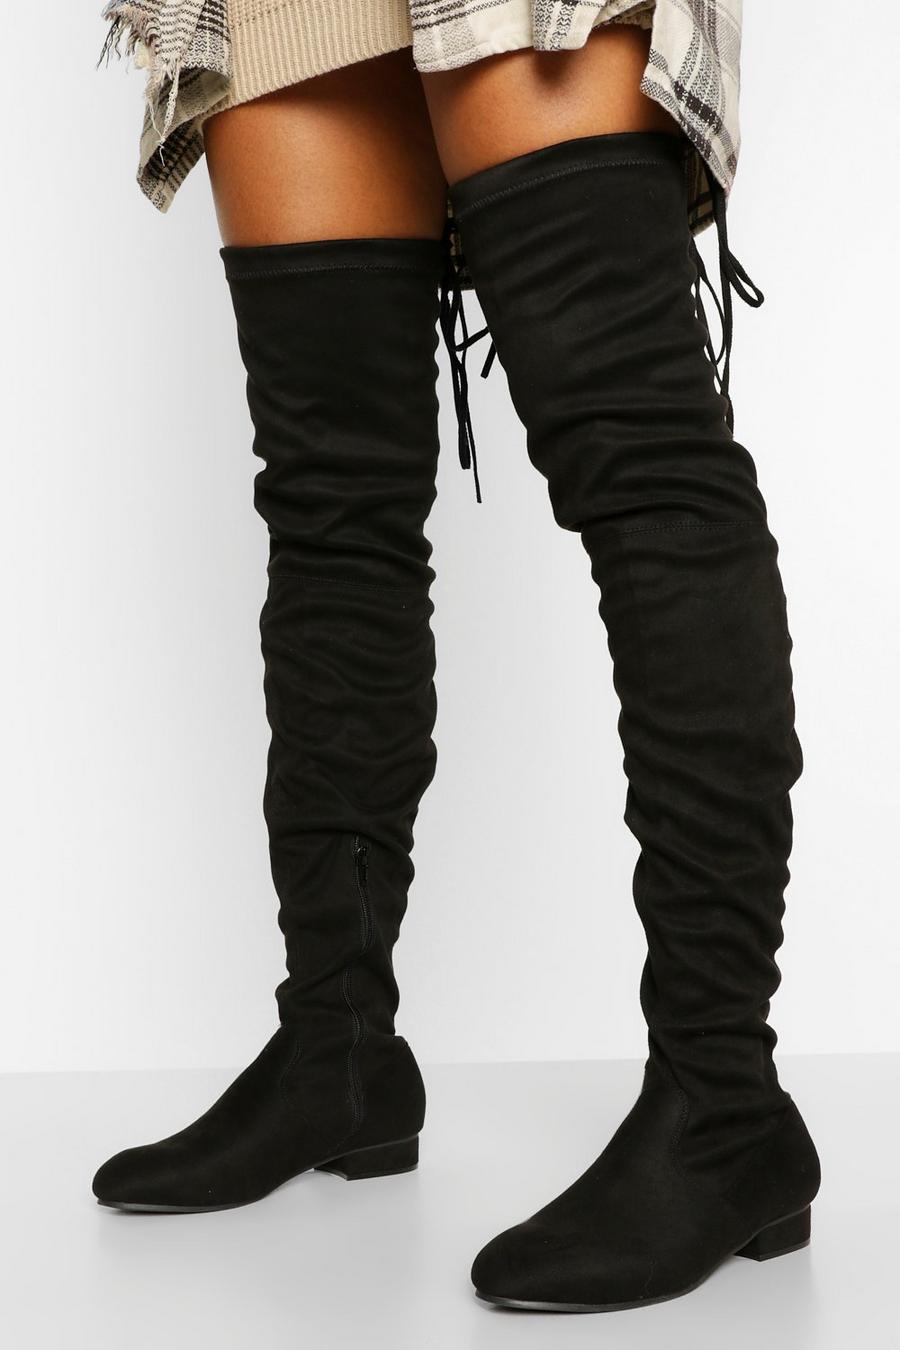 Black noir Wider Calf Over The Knee Boots